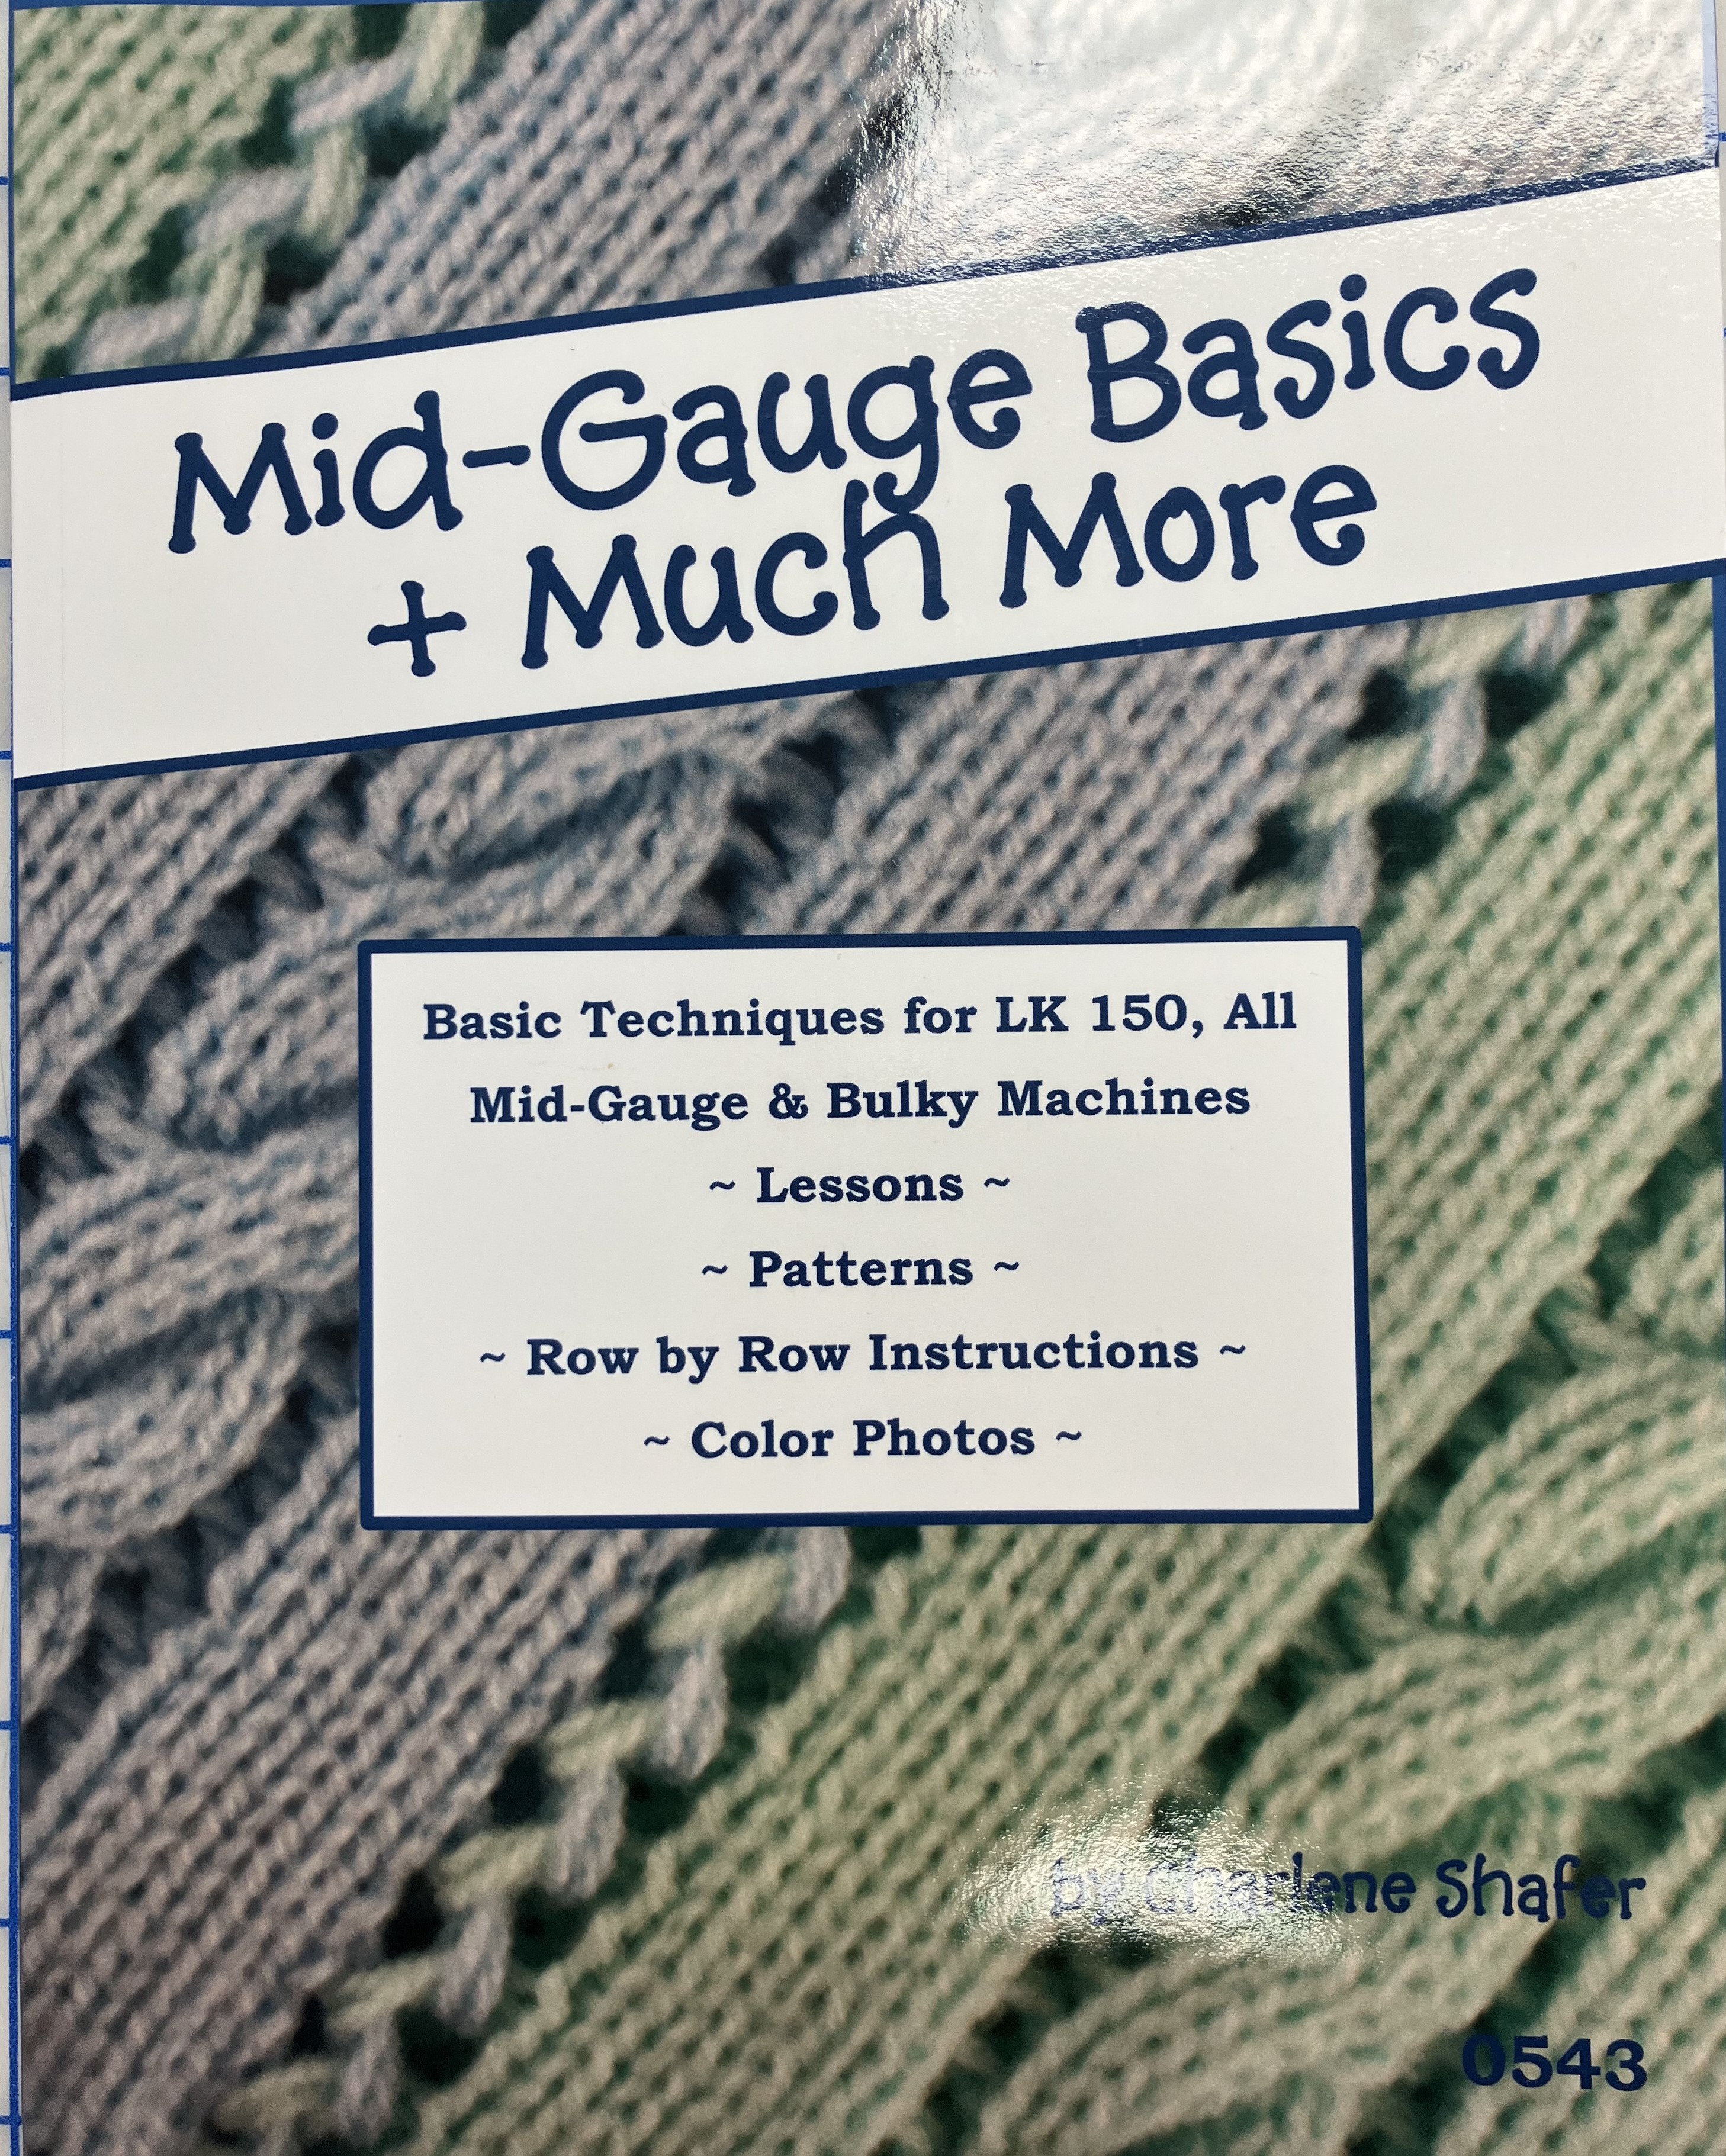 Mid-Gauge Basics and Much More